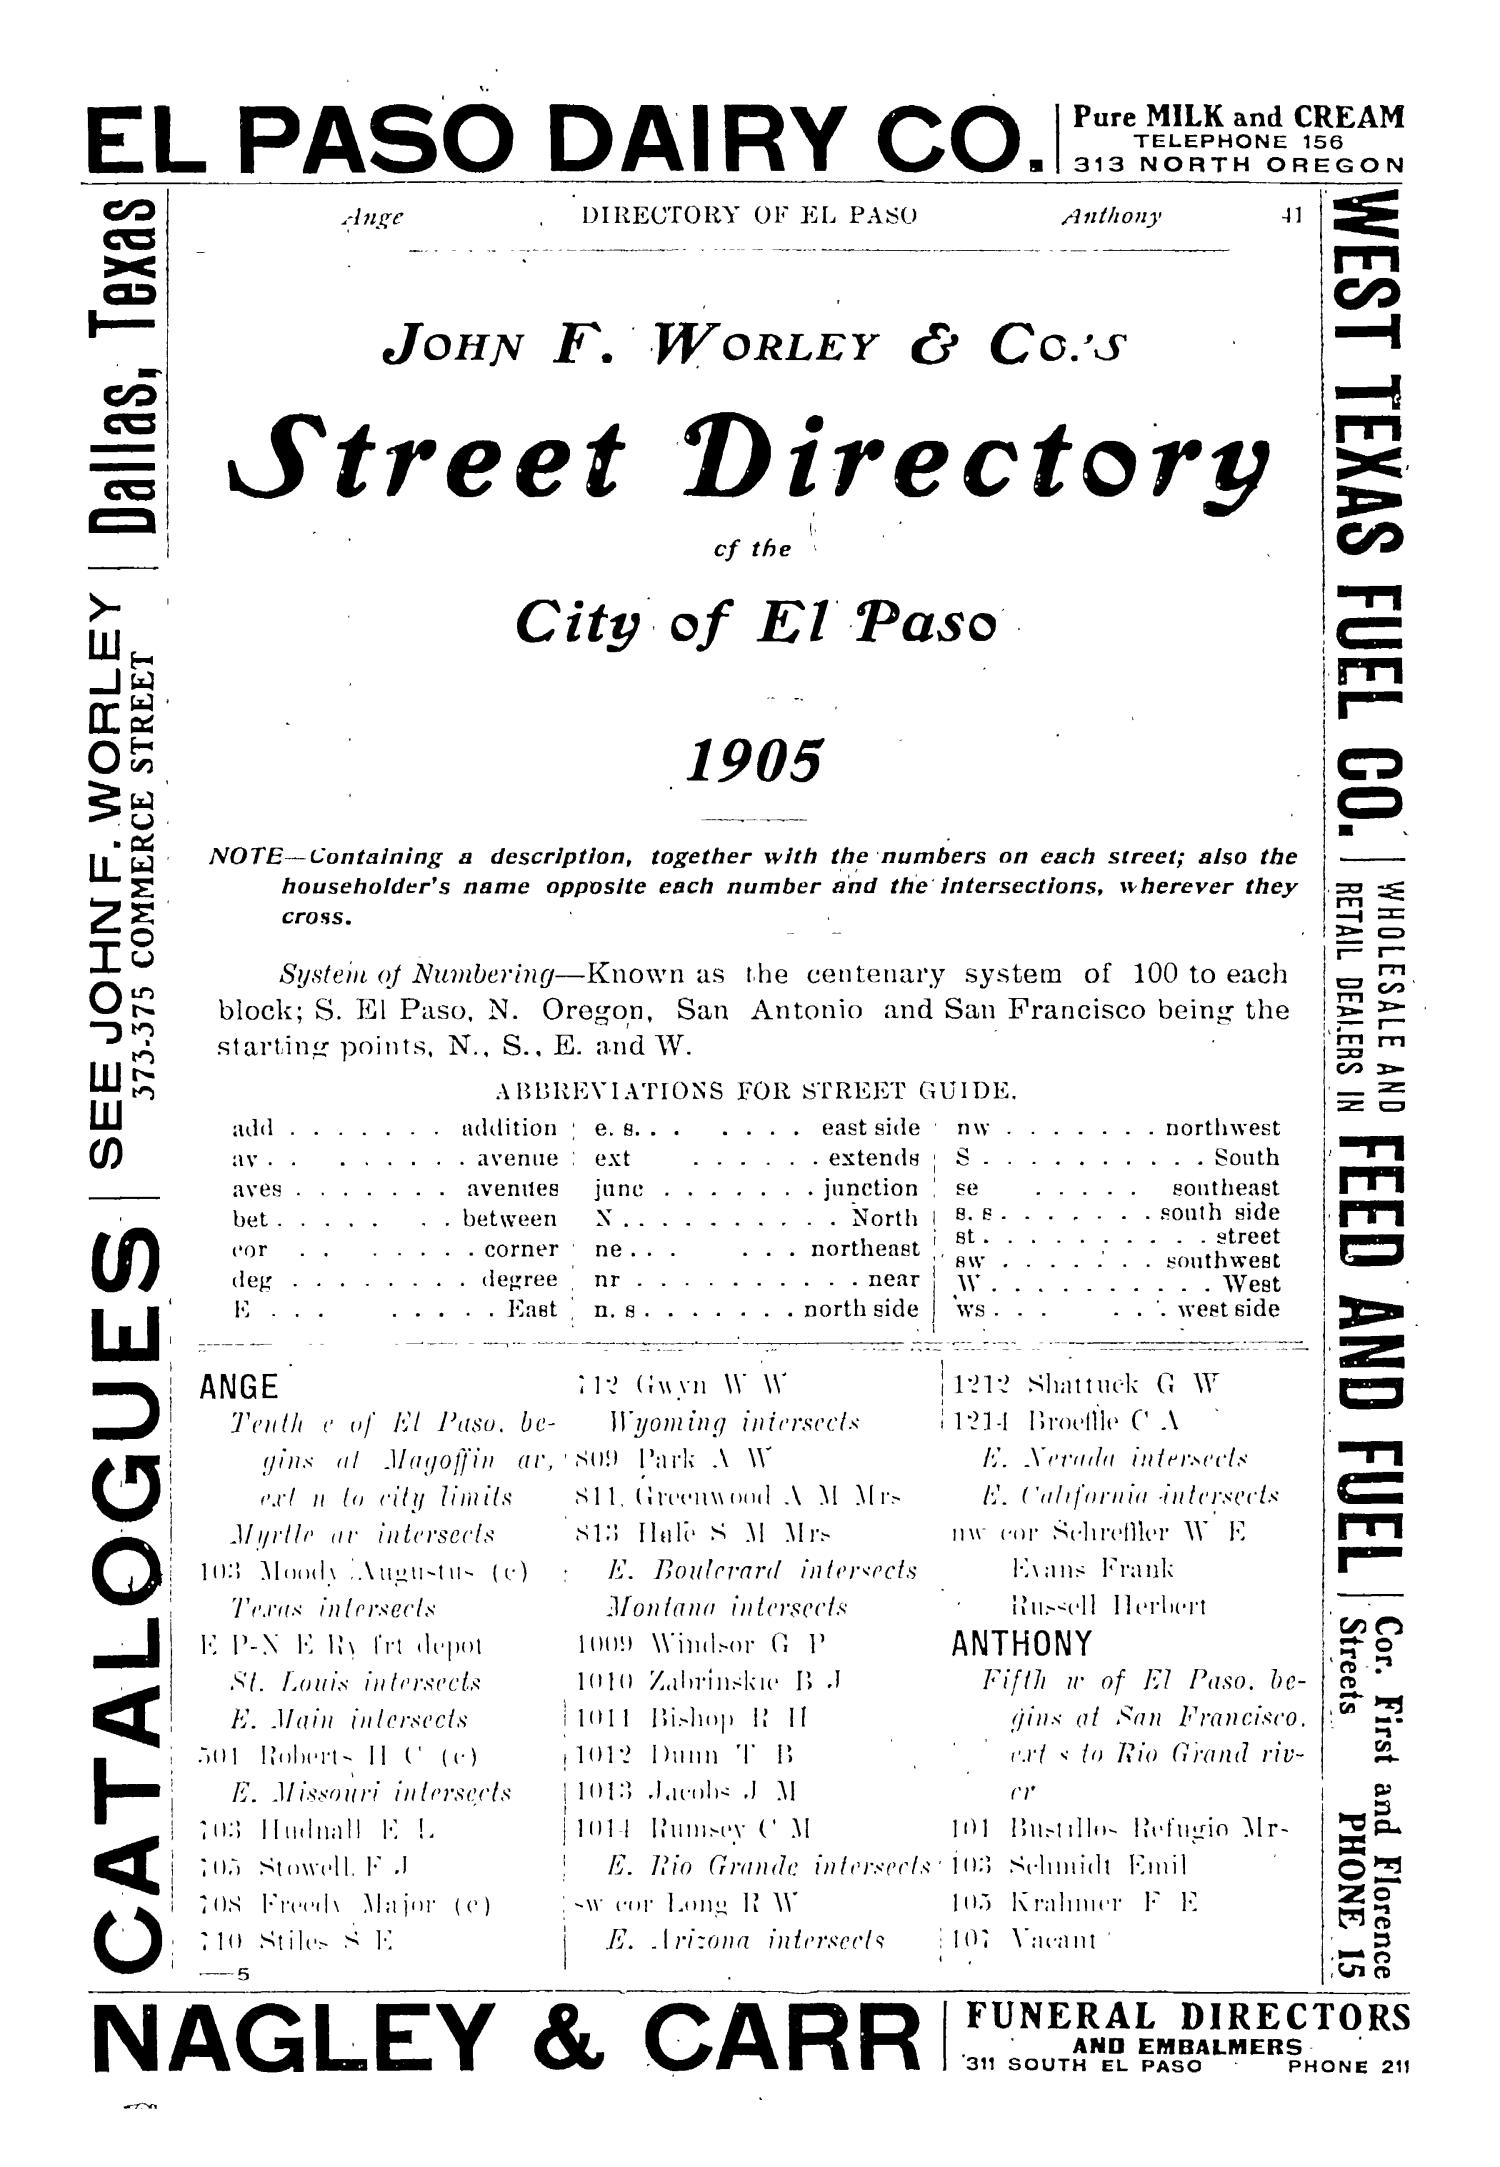 John F. Worley & Co.'s El Paso Directory for 1905
                                                
                                                    41
                                                